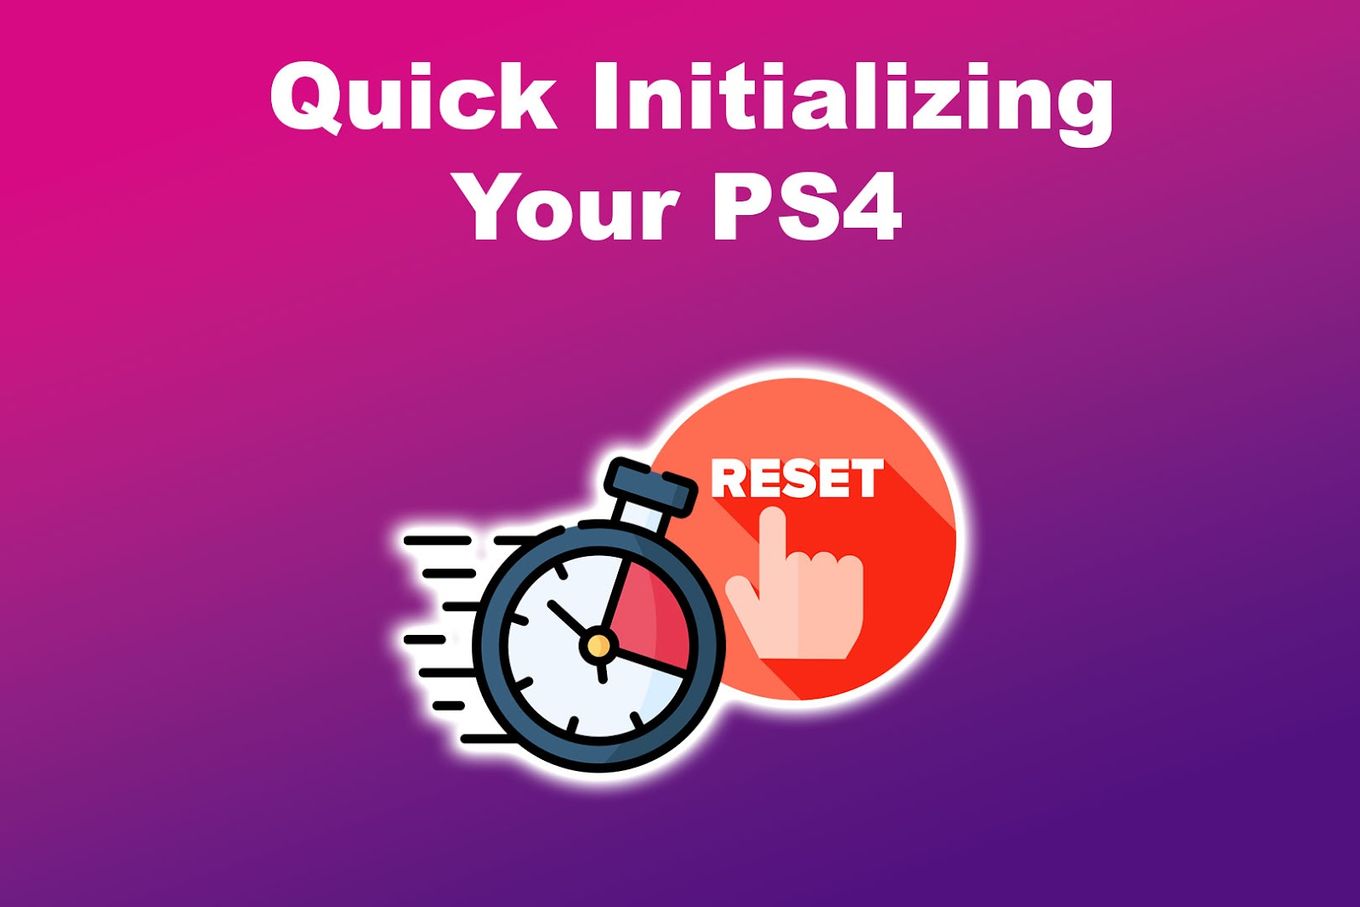 Quick Initializing Your PS4